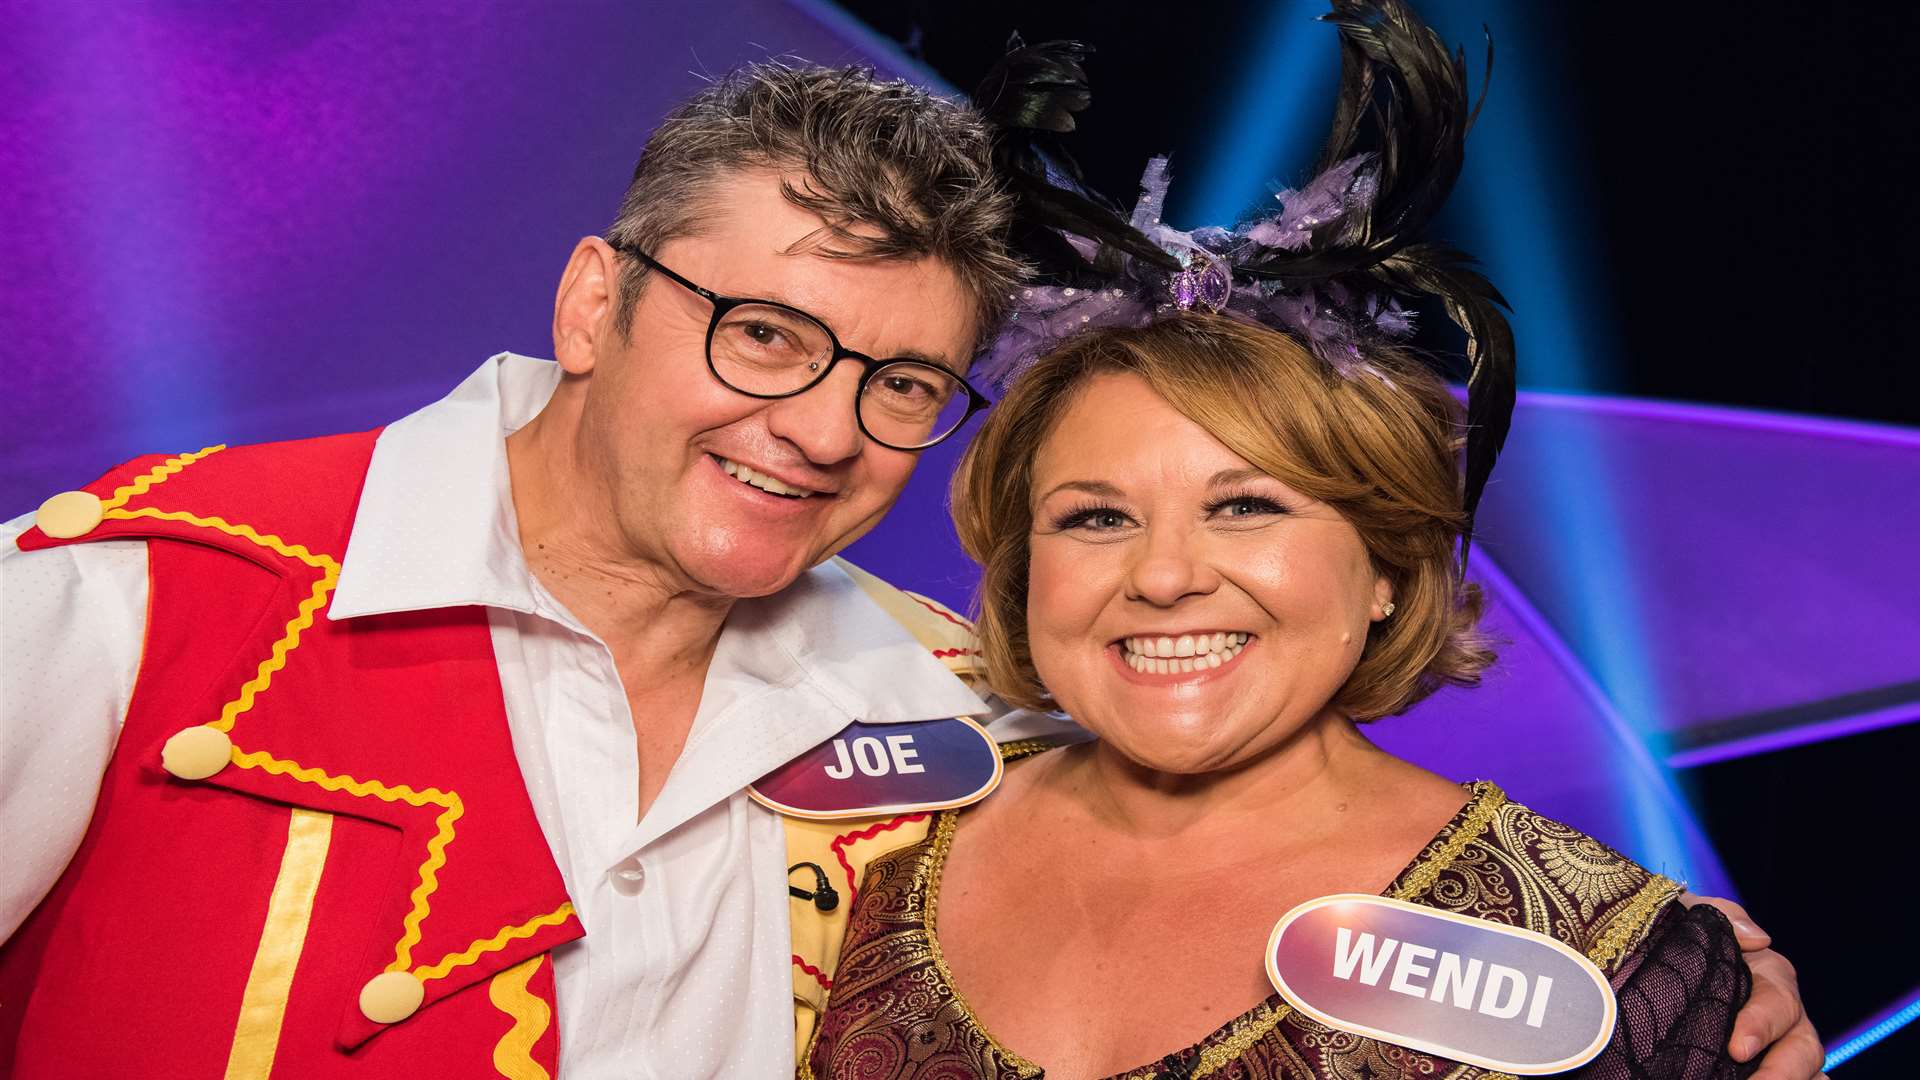 Joe Pasquale and Wendi Peters. BBC Pictures